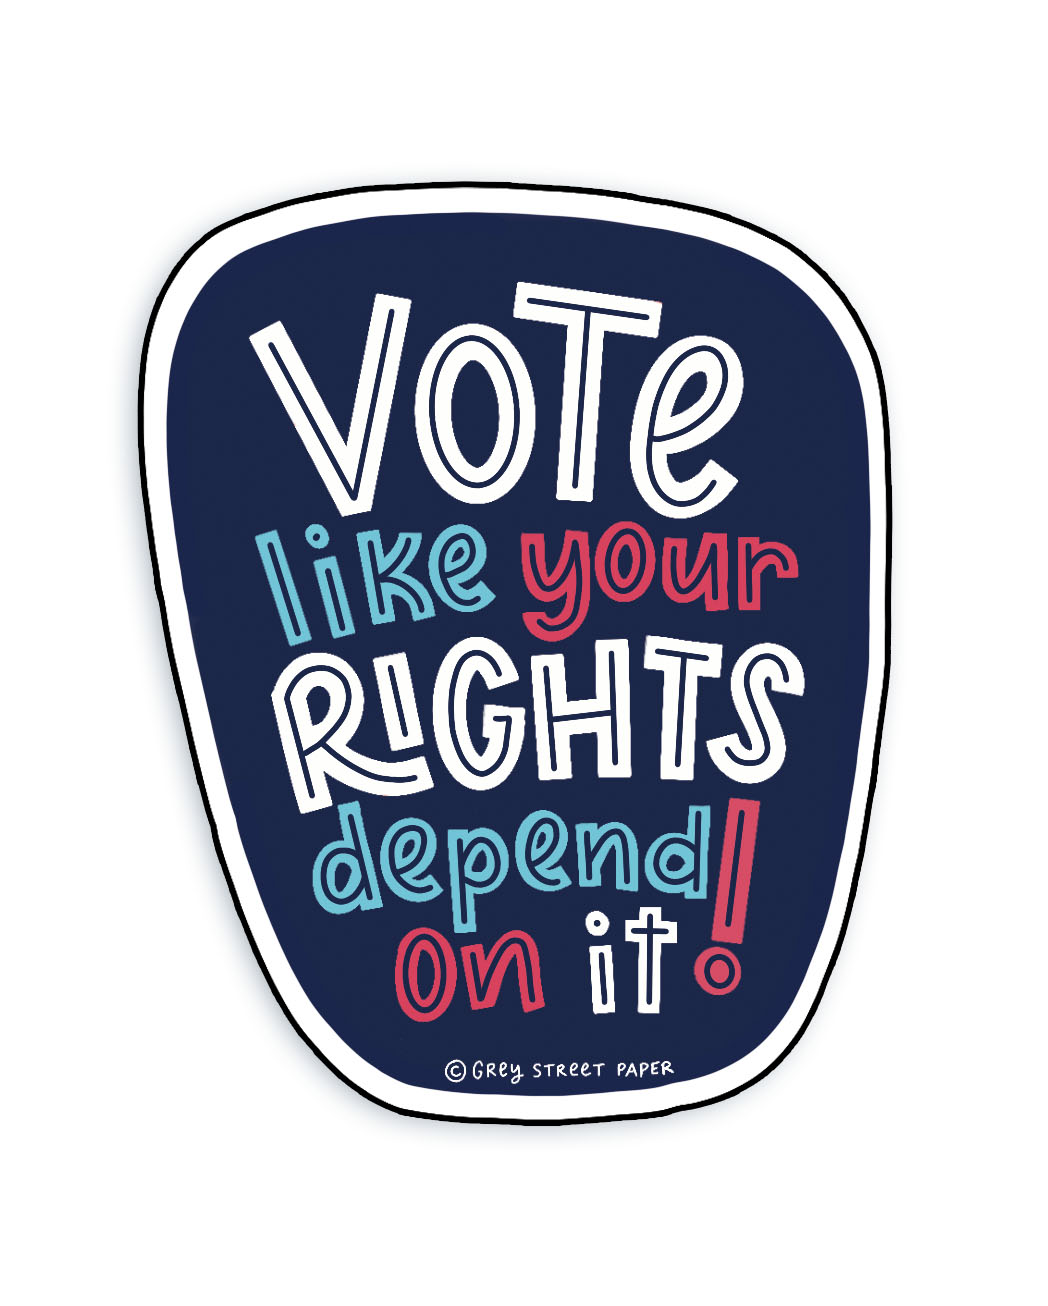 Vote Like Your Rights Depend on It Sticker 
															/ Grey Street Paper							